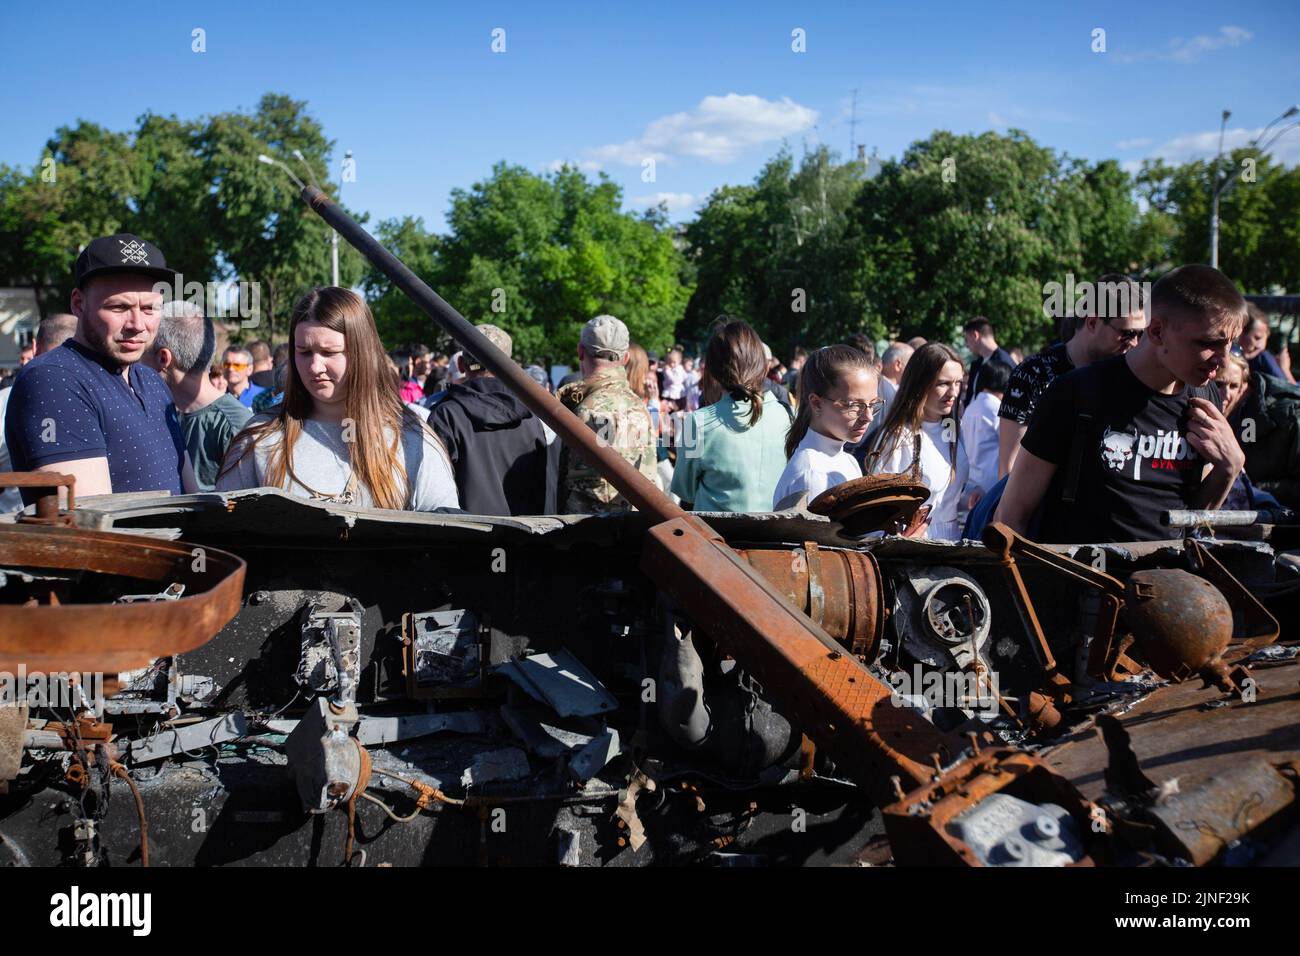 People look at a burnt Russian armored personnel carrier during an exhibition showing Russian military hardware destroyed during Russia's invasion of Ukraine in central Kyiv. On February 24, 2022, Russian troops entered Ukrainian territory, starting a conflict that provoked destruction and a humanitarian crisis. Stock Photo